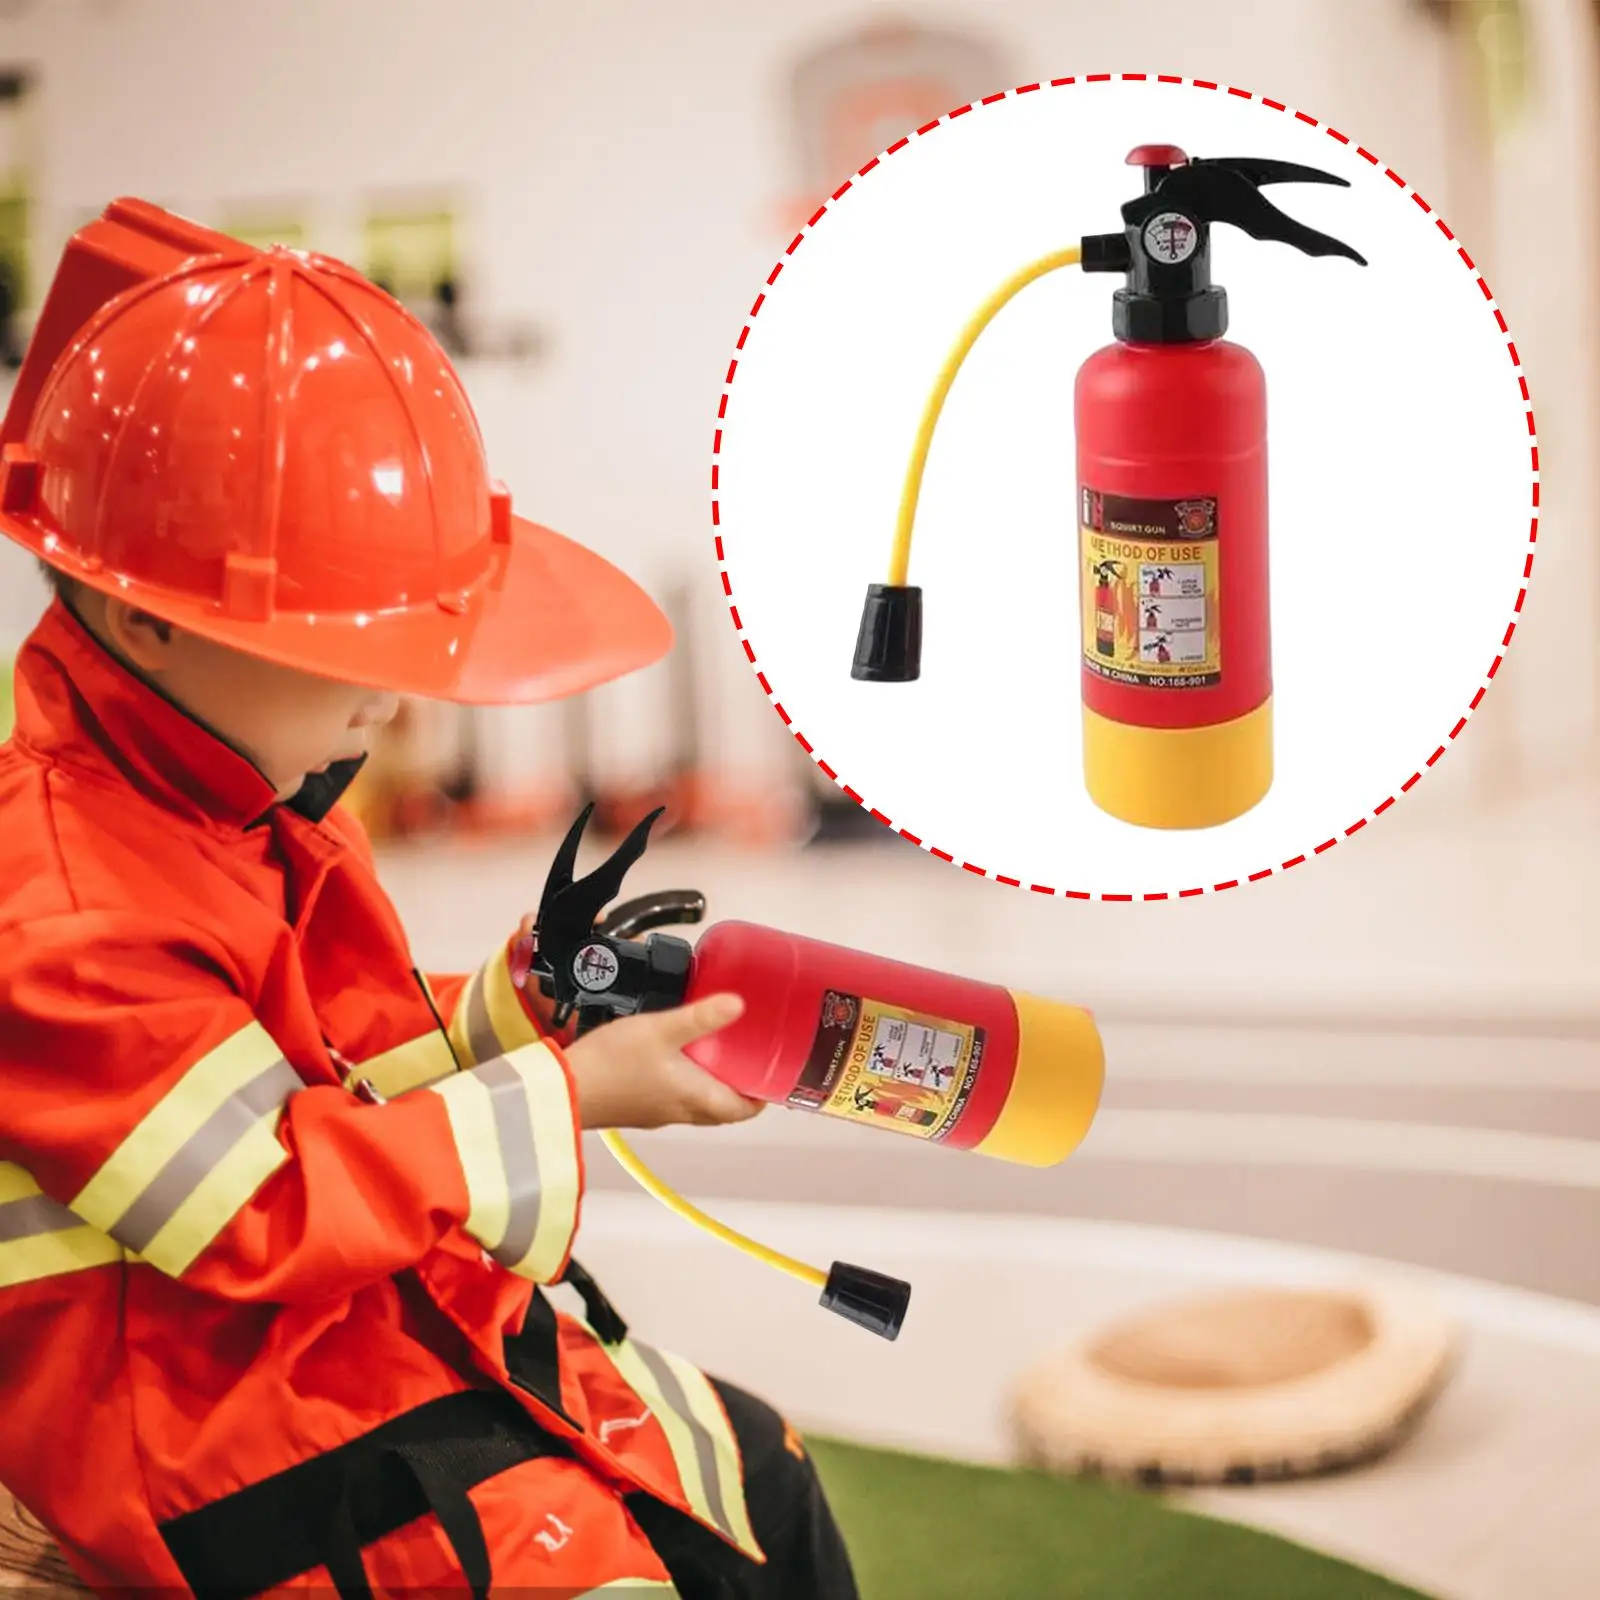 Extinguisher Toy Summer Toys Fireman Squirter for Kids Girl Boys Party Favors Halloween